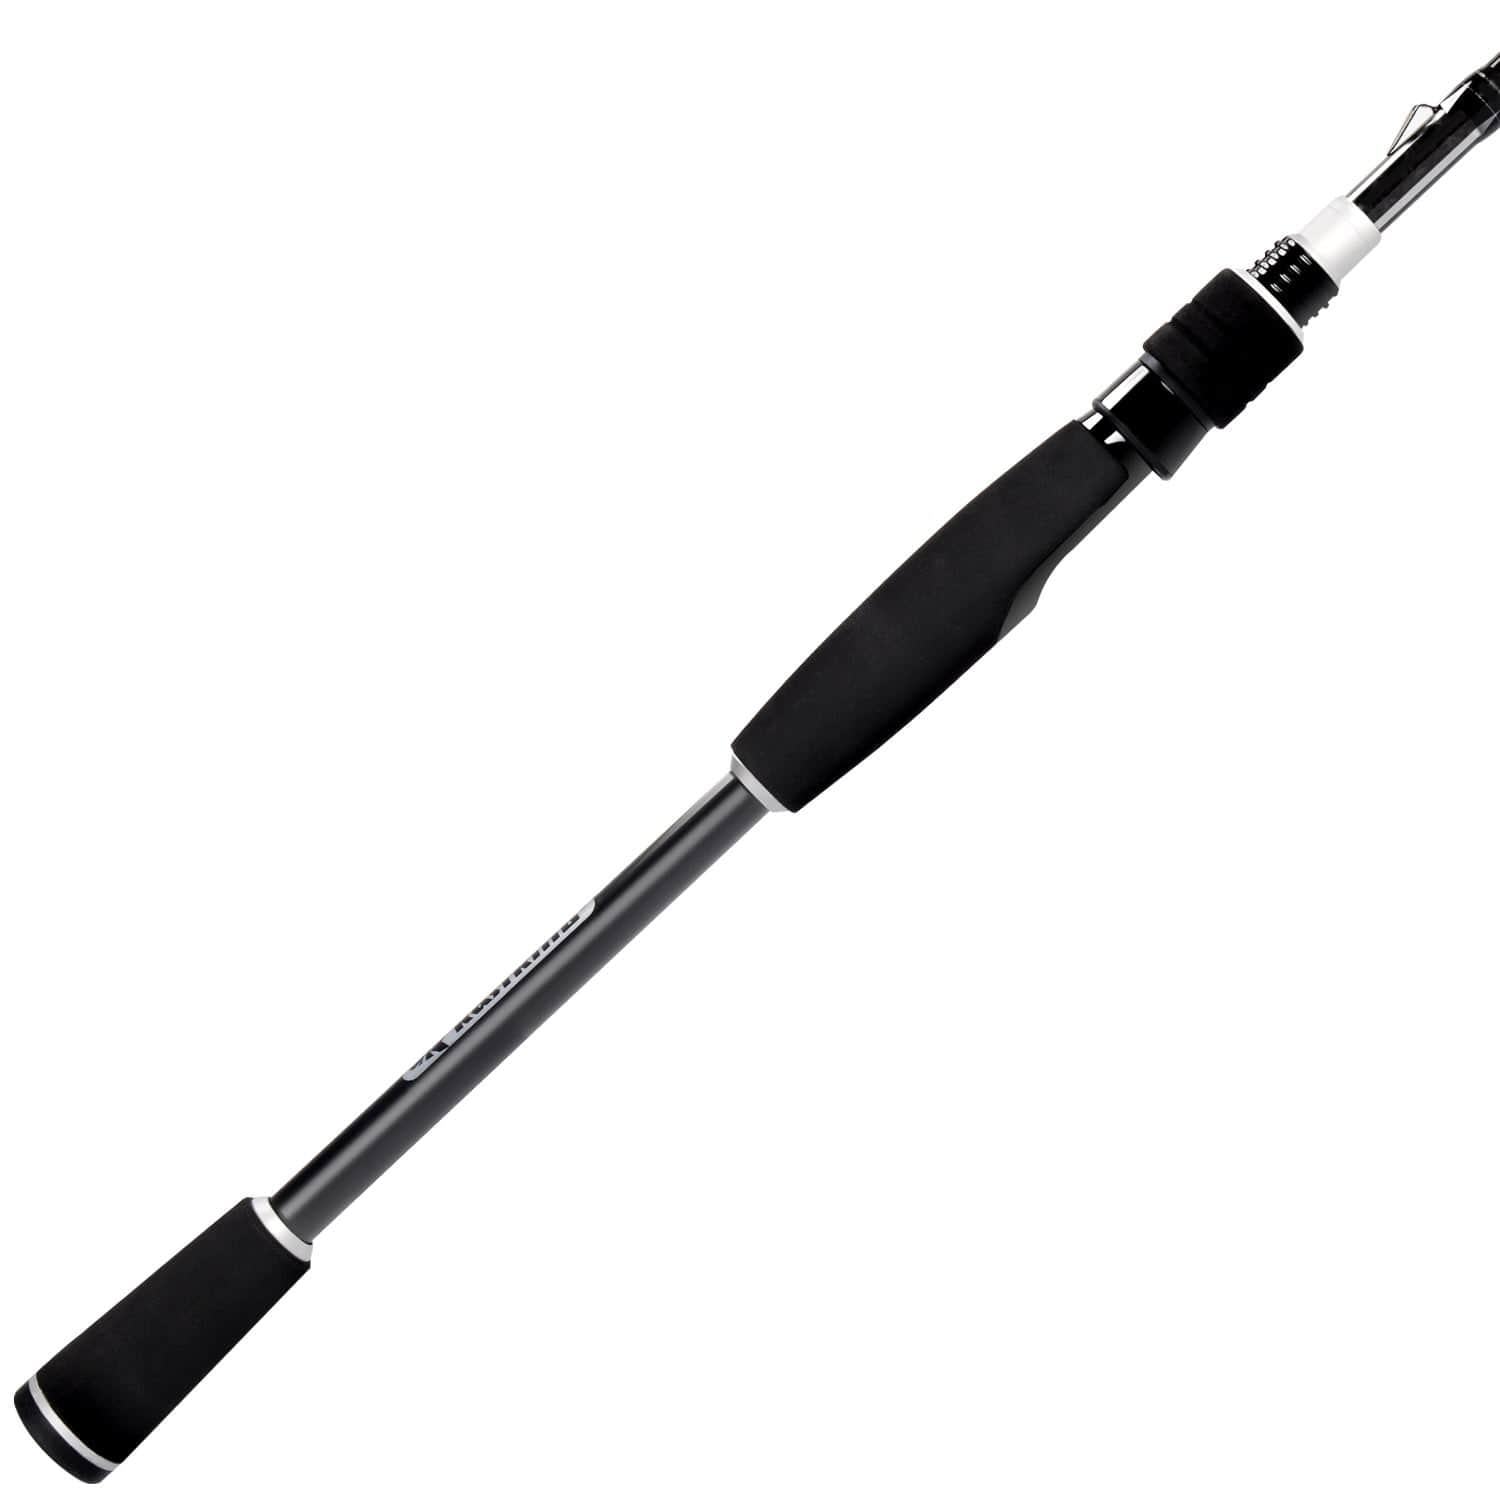 KastKing Spartacus II Fishing Rods - IM6 Graphite Blanks Casting & Spinning  Rods, 2-Piece Rods with Extra Tip Section, PTS Power Transition System